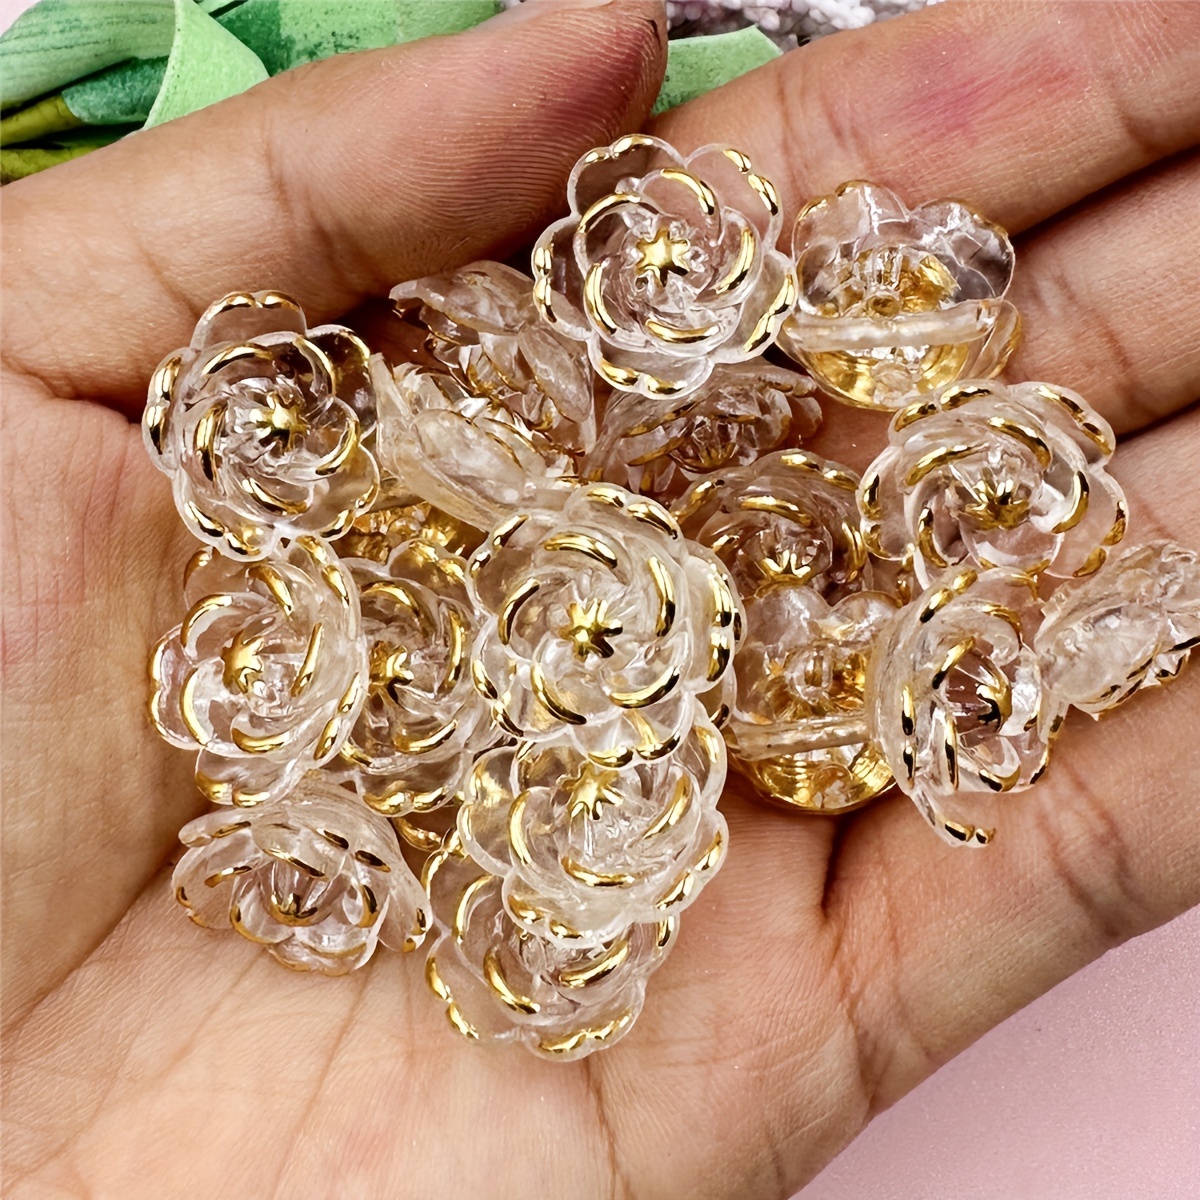 Acrylic Flower 11 - 11.9 mm Size Jewelry Making Beads for sale